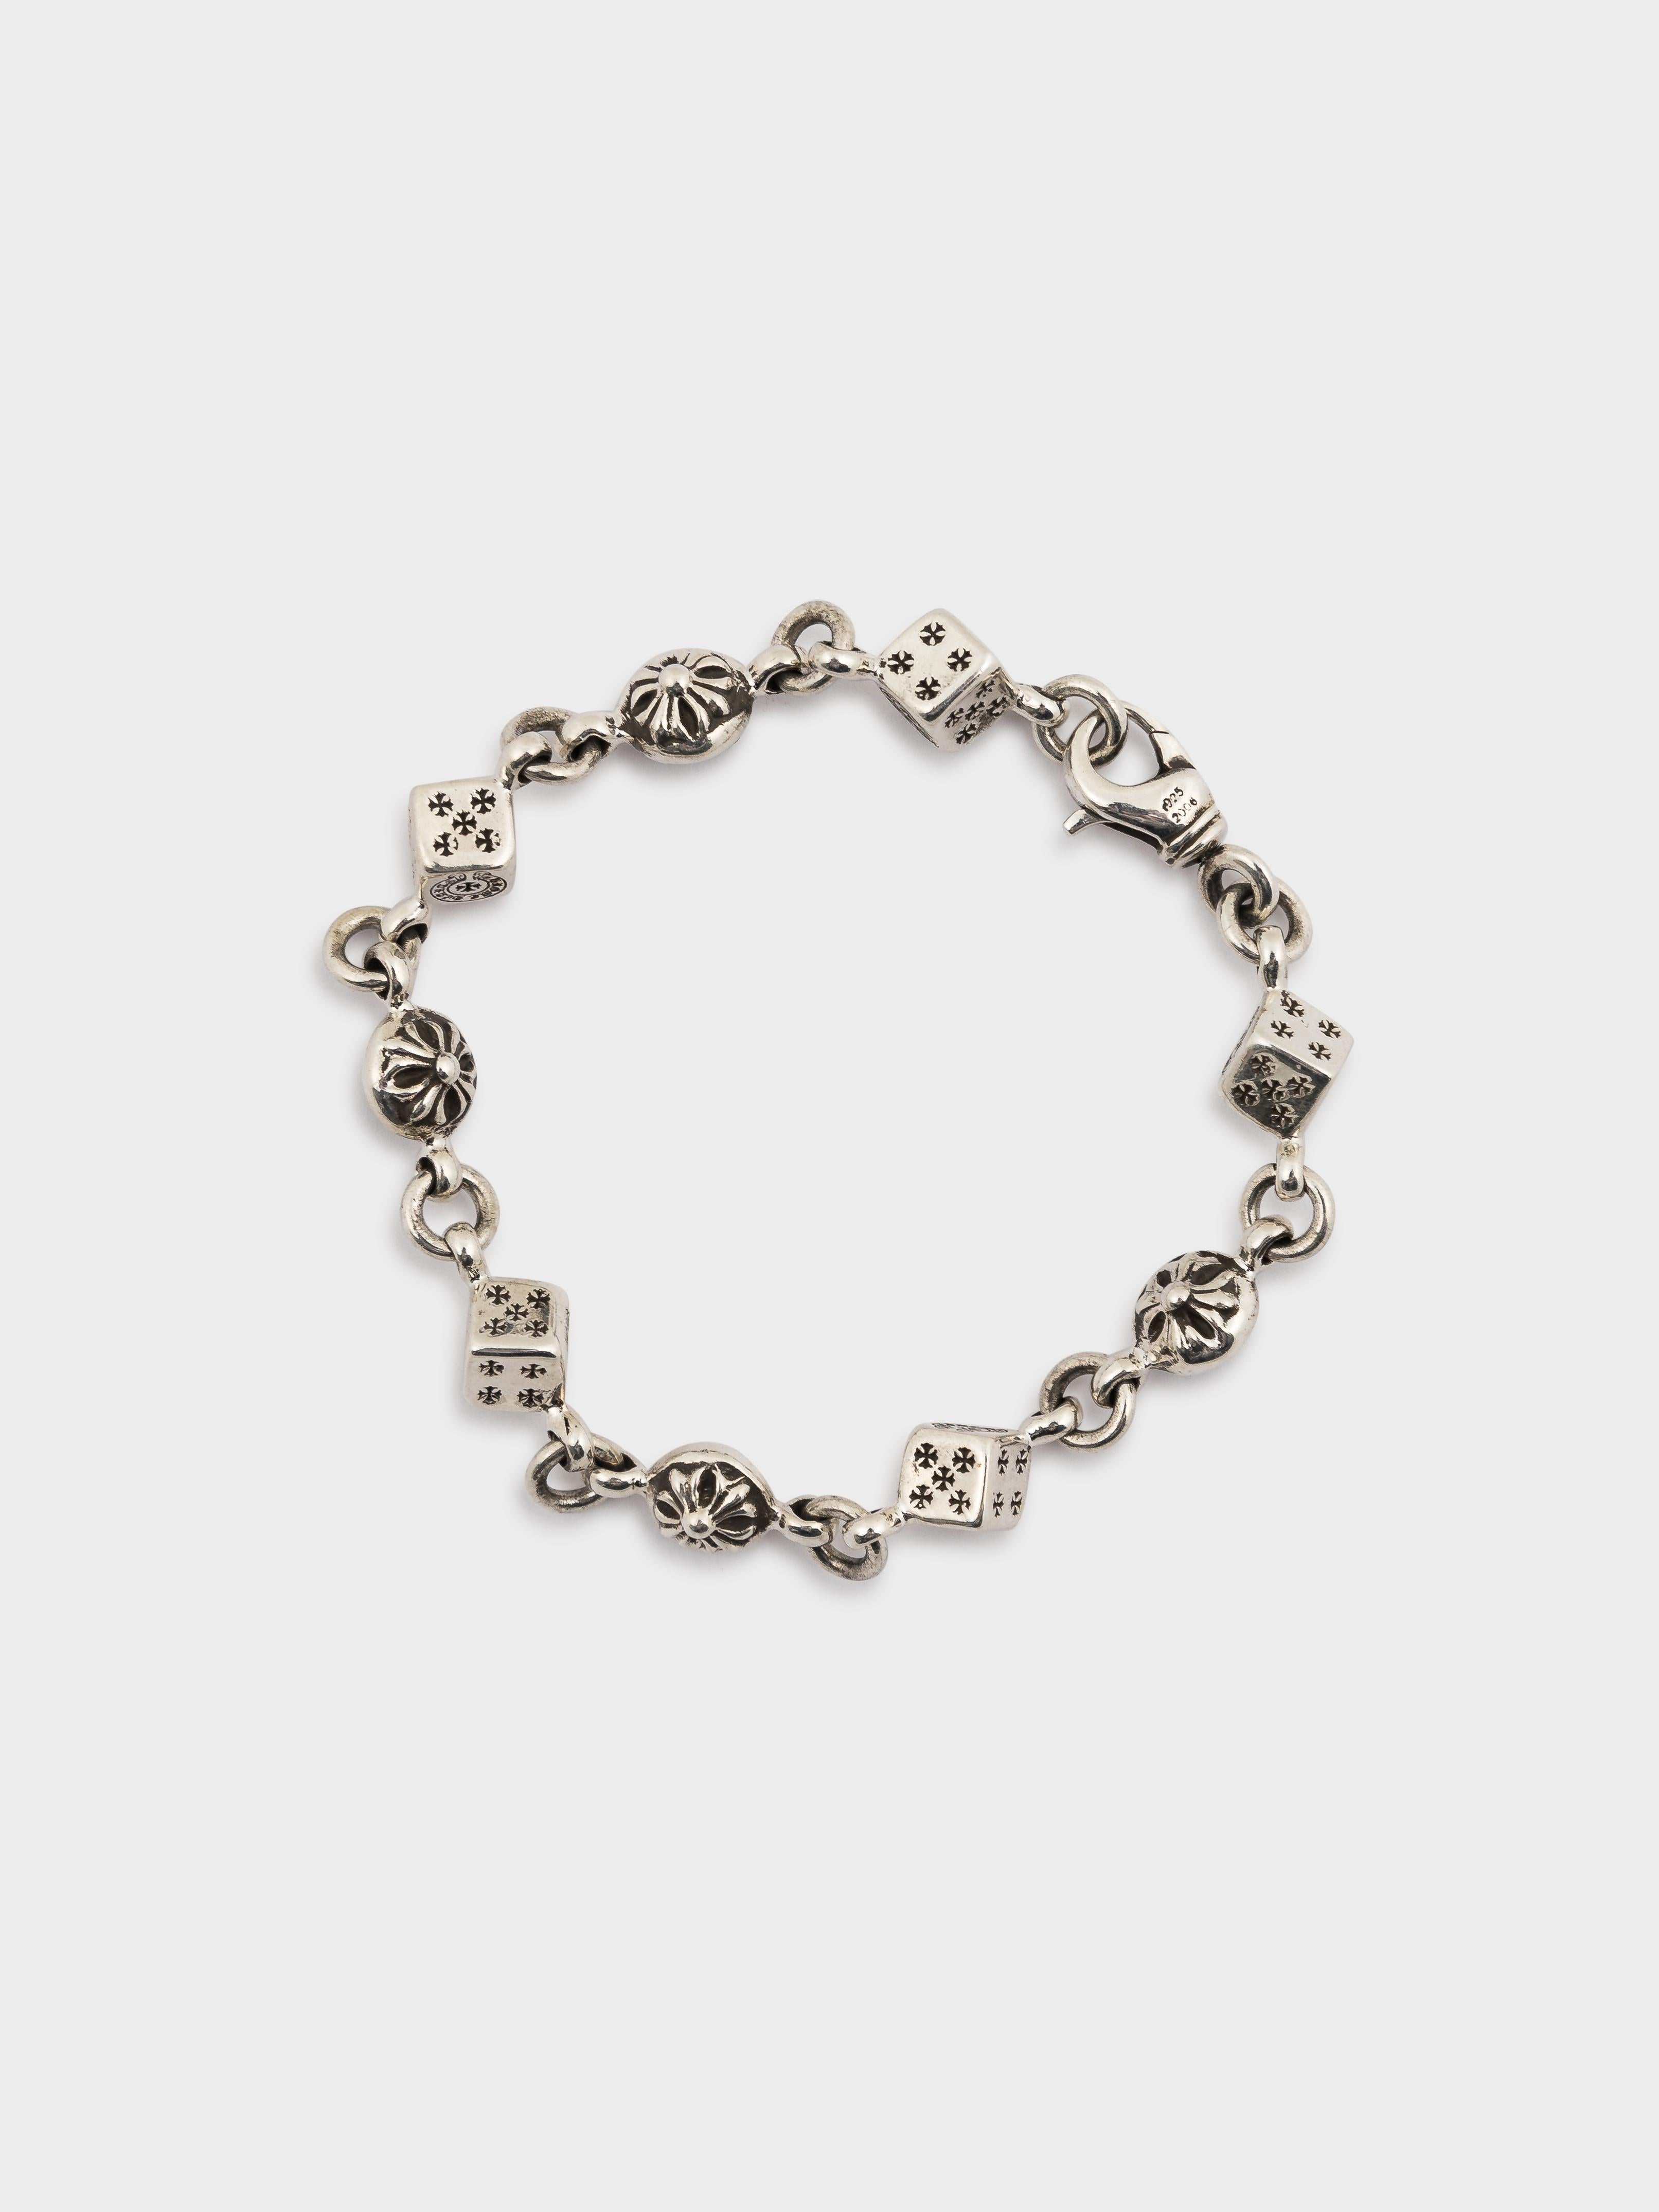 ✓ Authenticated

Our trained in-house authentication experts have reviewed this item to ensure that it is original. We guarantee its authenticity.

Here is a gently used Dice Bracelet from Chrome Hearts.

Condition: Like new 

